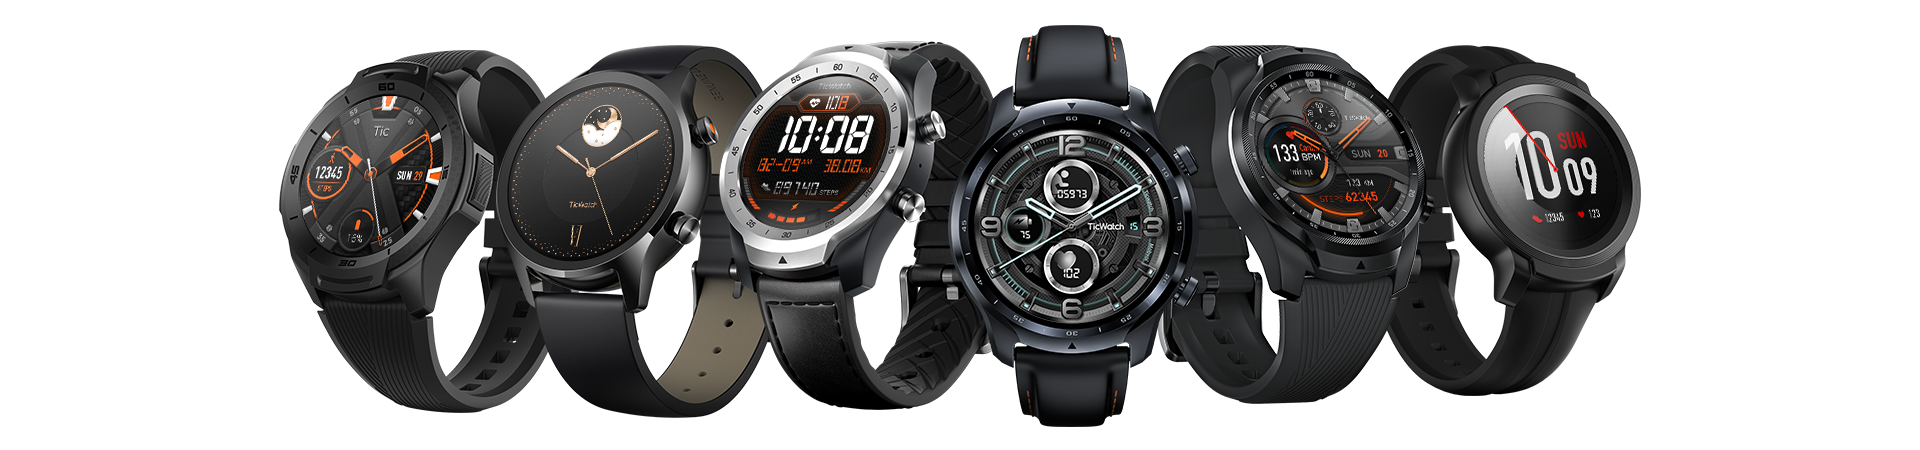 TicWatch C2 - A smartwatch that fits 